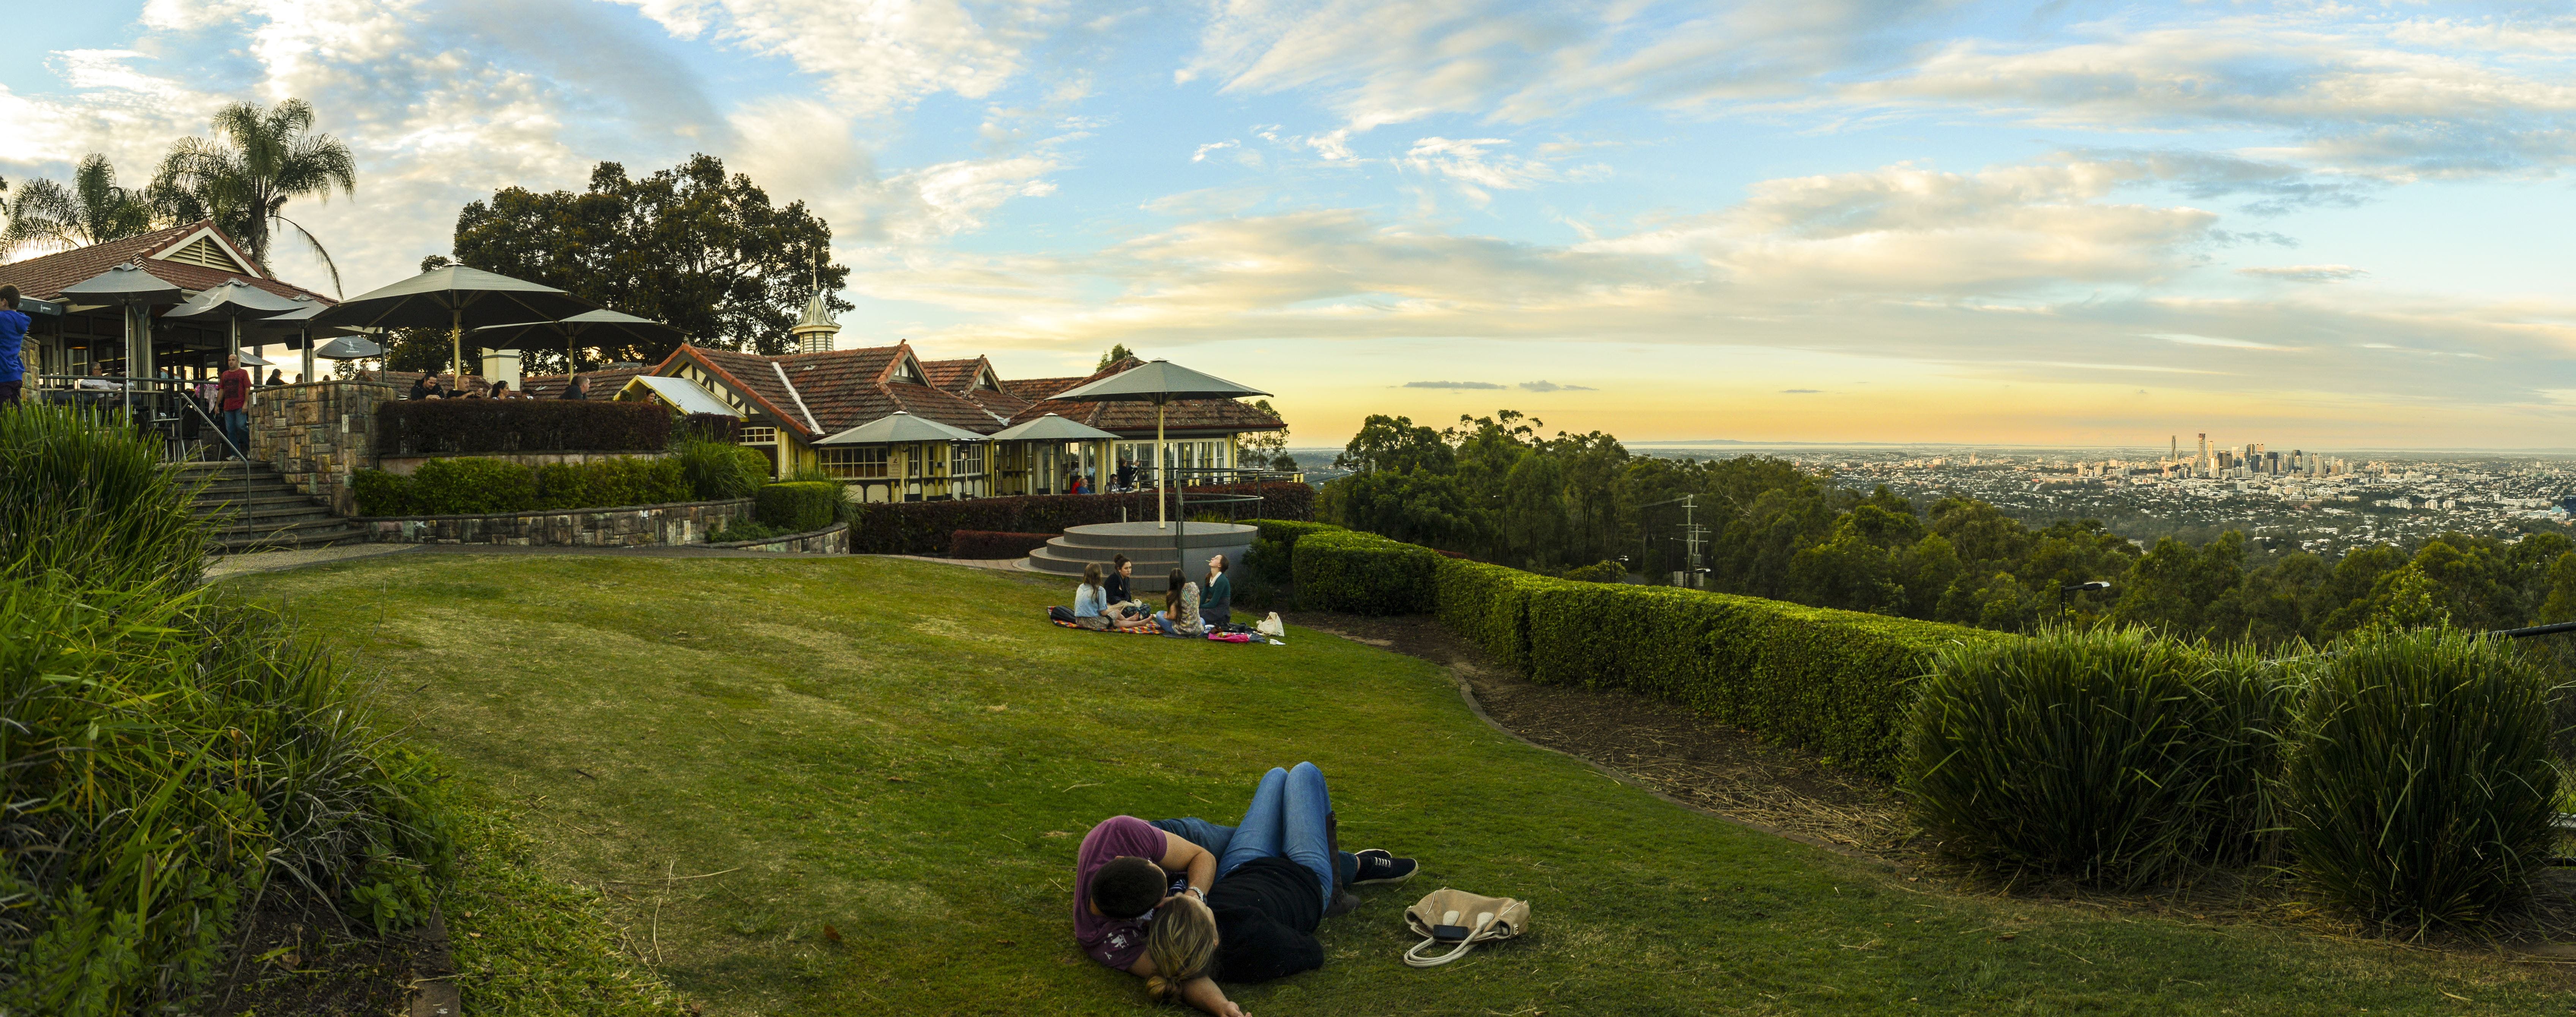 Brisbane Lookout Mount Coot-tha - Find Attractions